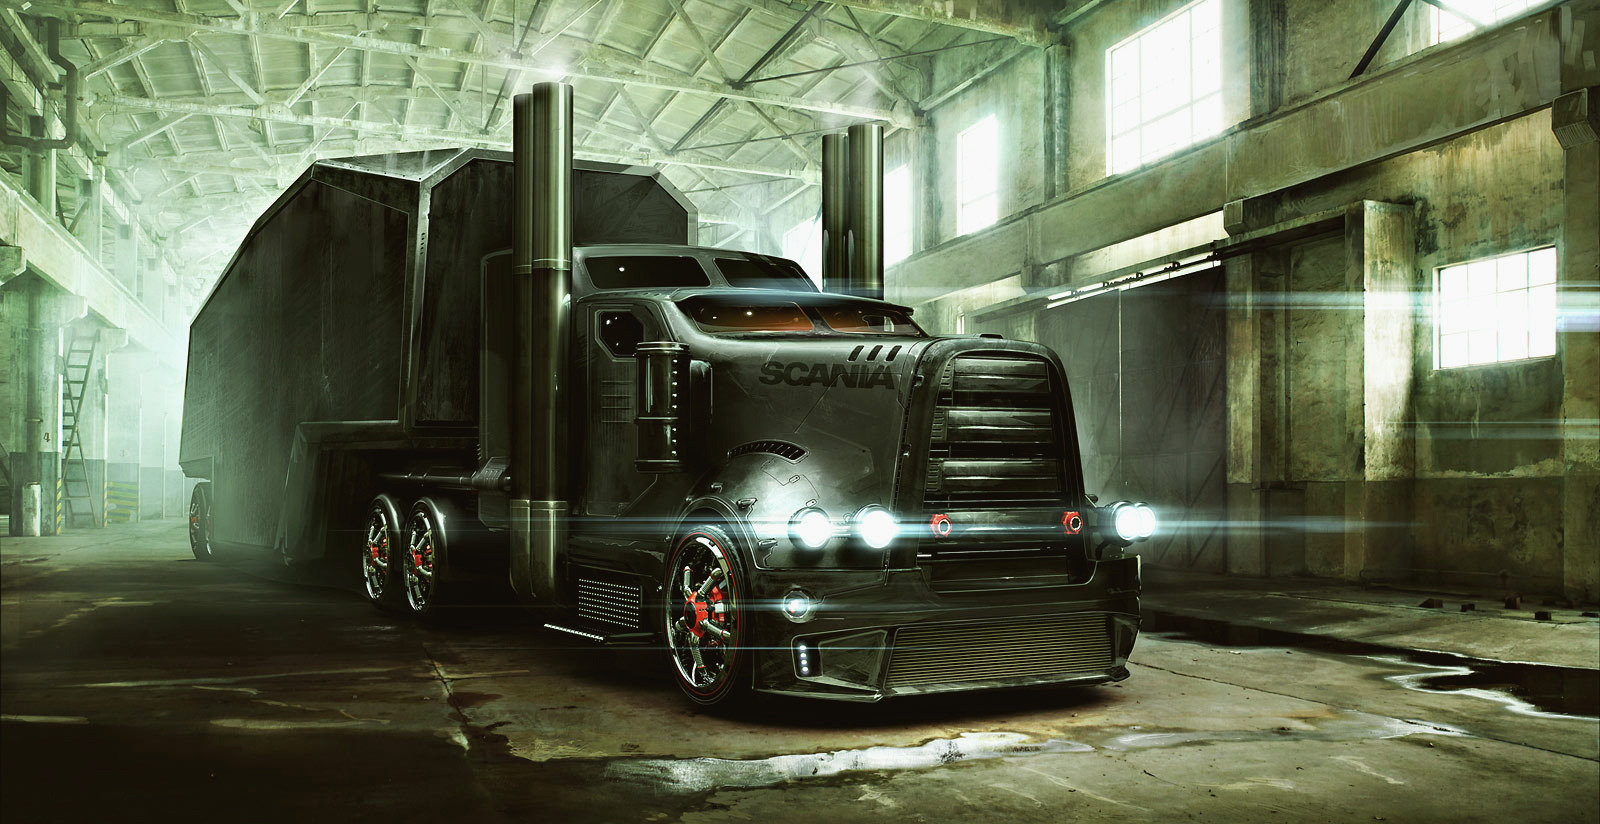 Truck hd papers and backgrounds